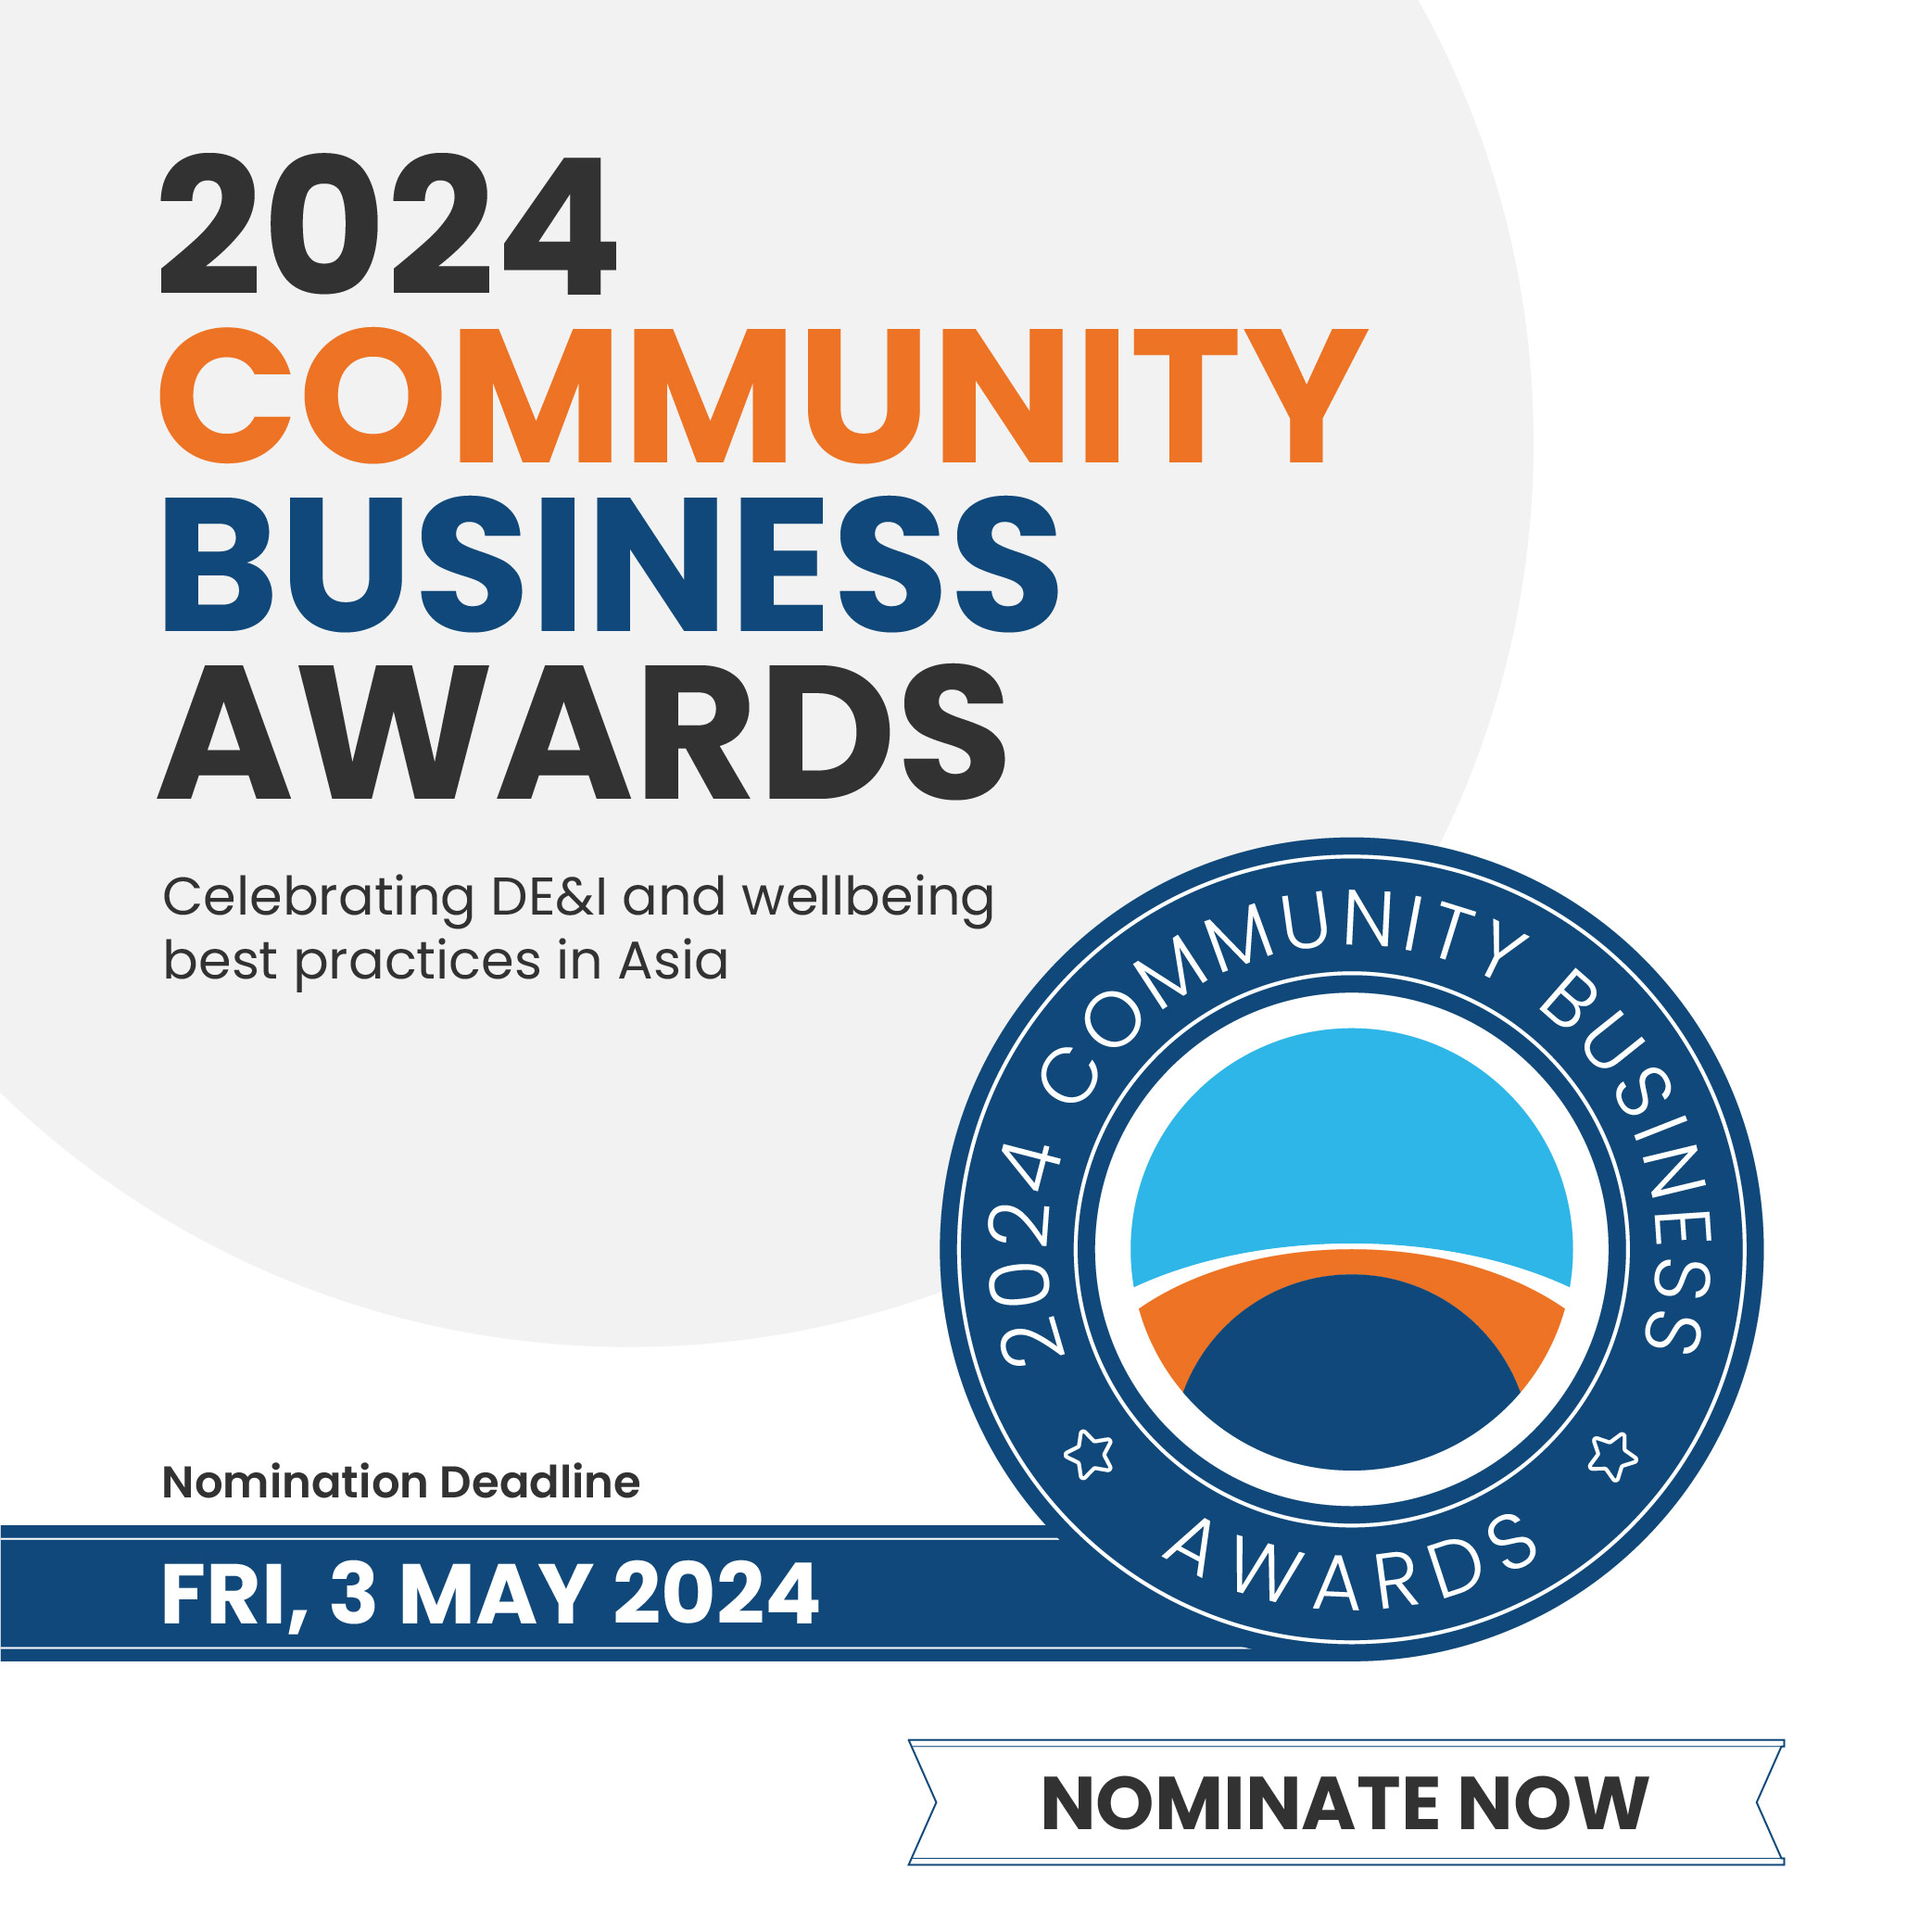 Final call for nominations for the 2024 Community Business Awards 